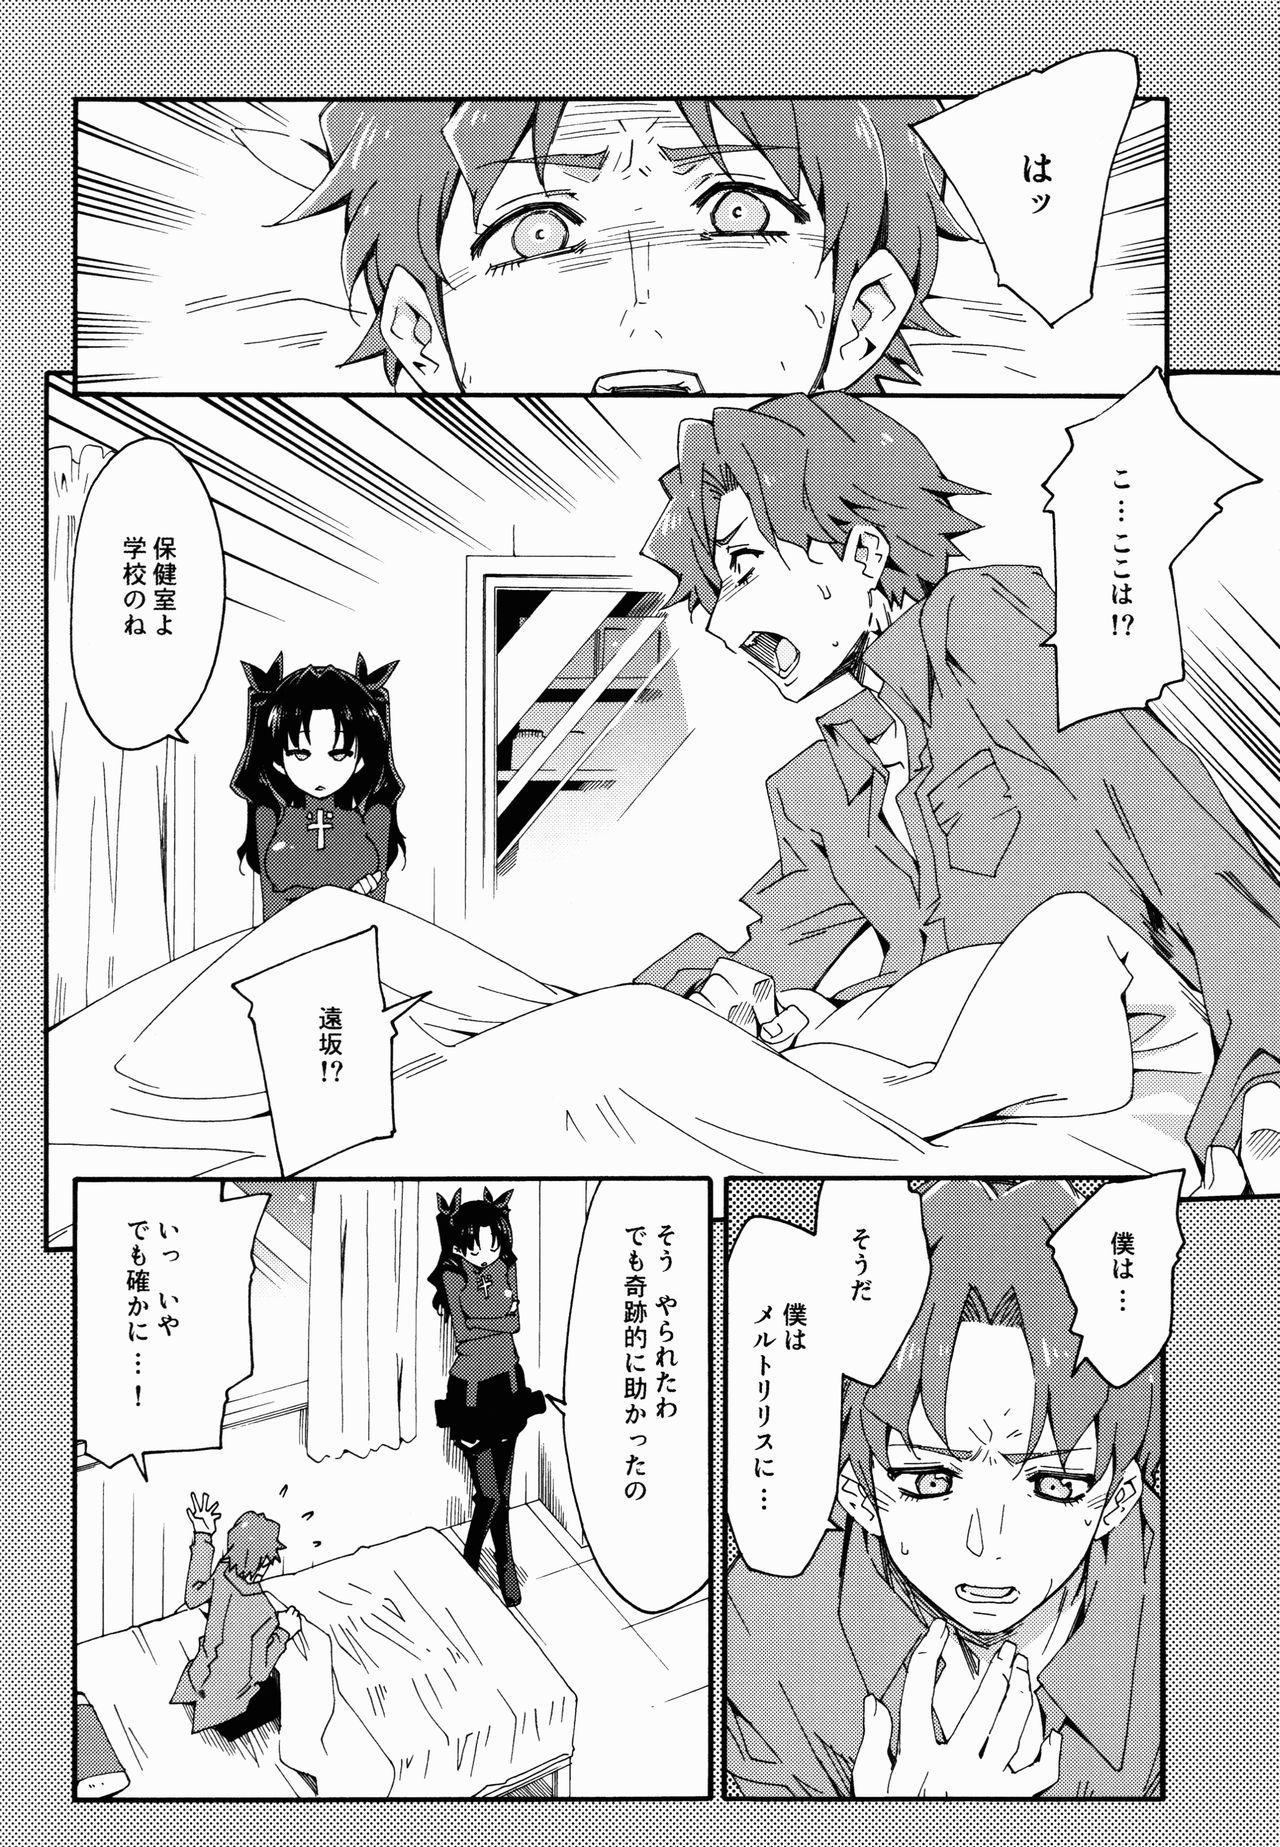 Thot Melty/kiss - Fate extra Internal - Page 6